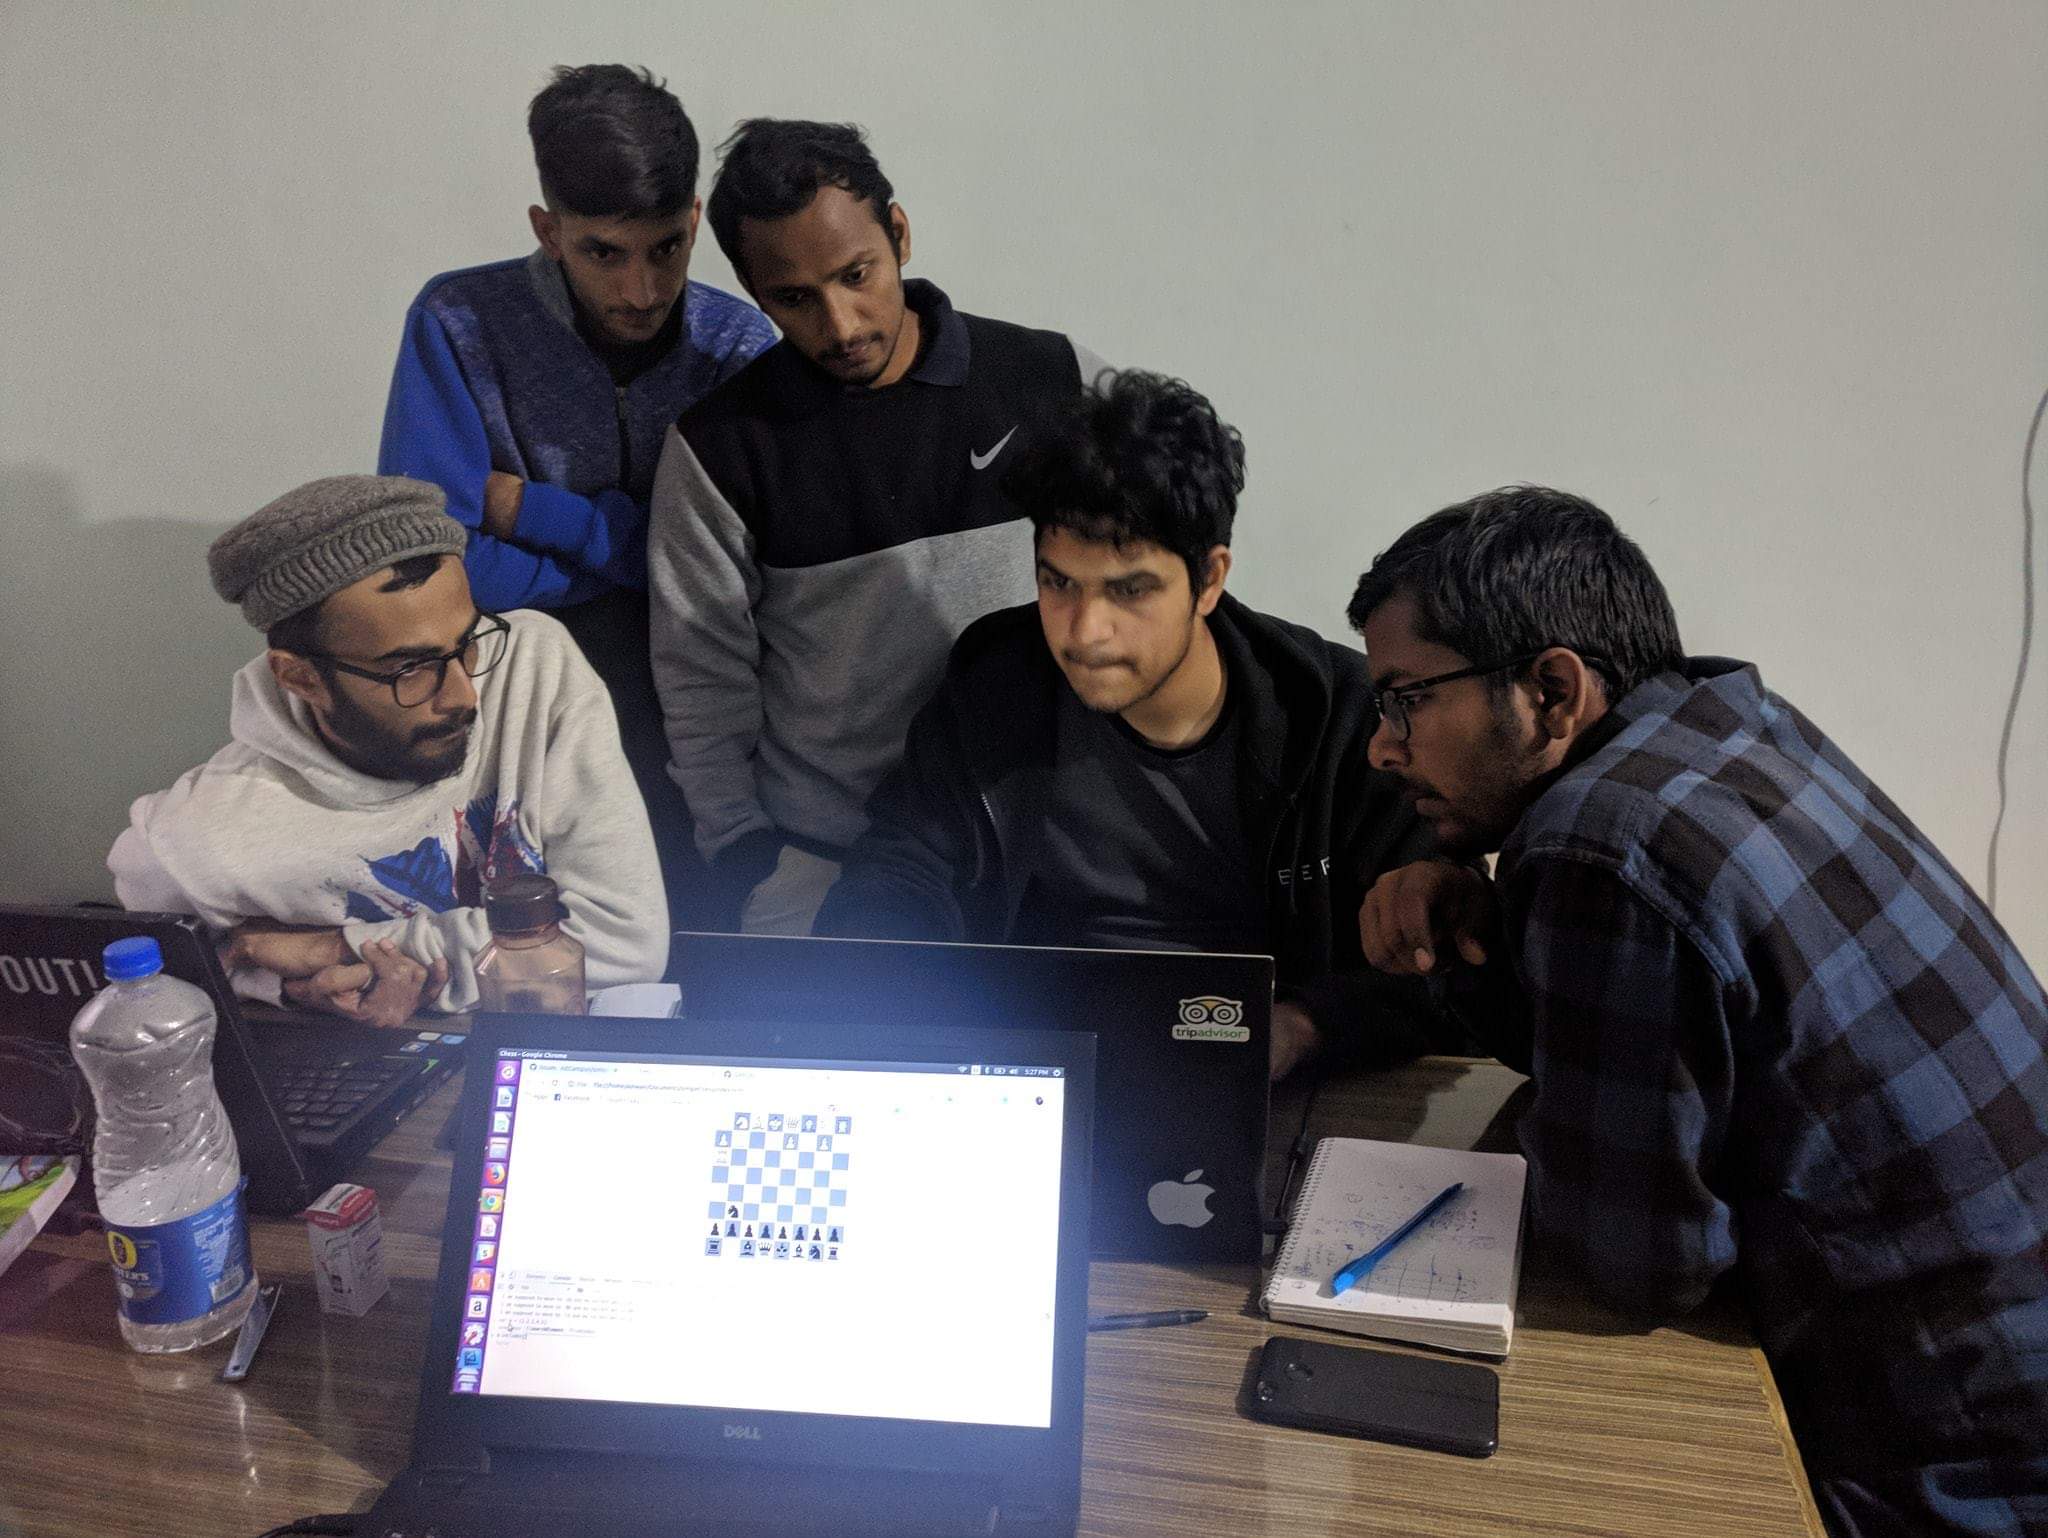 Peer learning at AltCampus